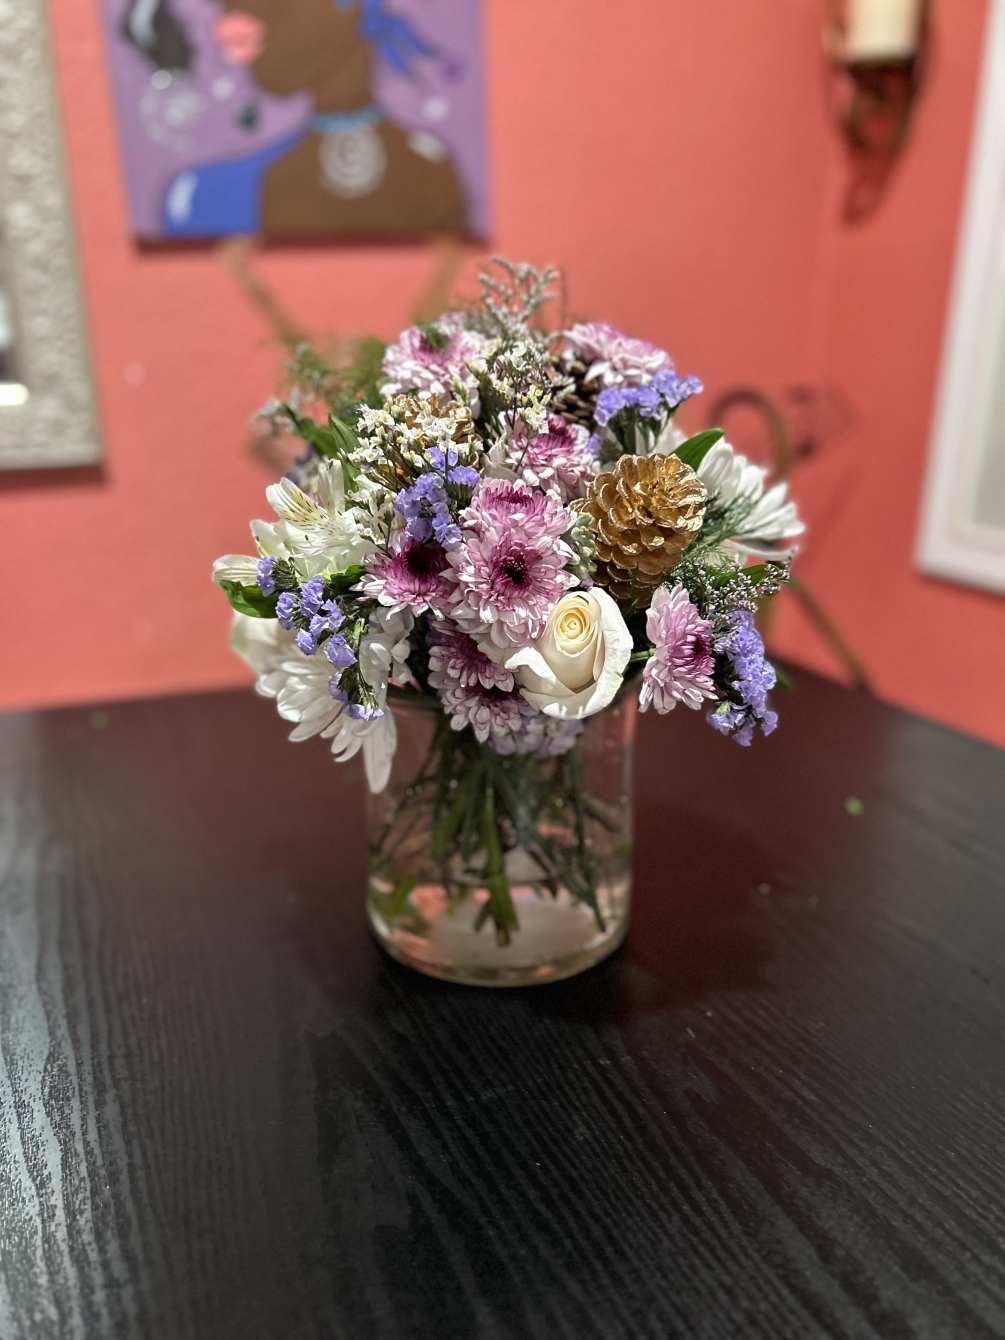 Short vase with white or lavender roses, and daisies in a short